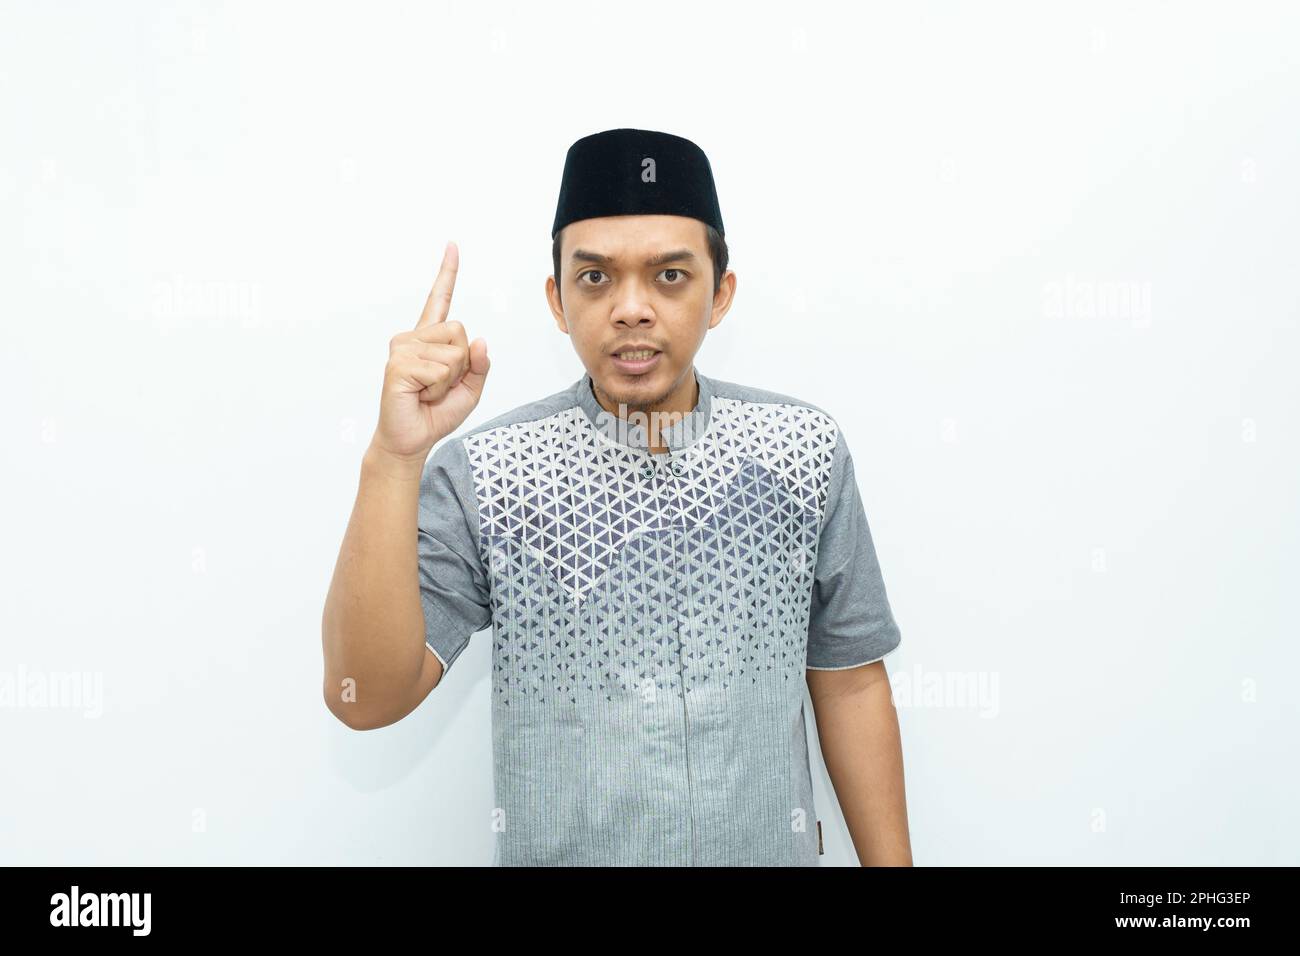 Portrait of Indonesian Asian Muslim man showing finger up, speaking, giving warning gesture Stock Photo